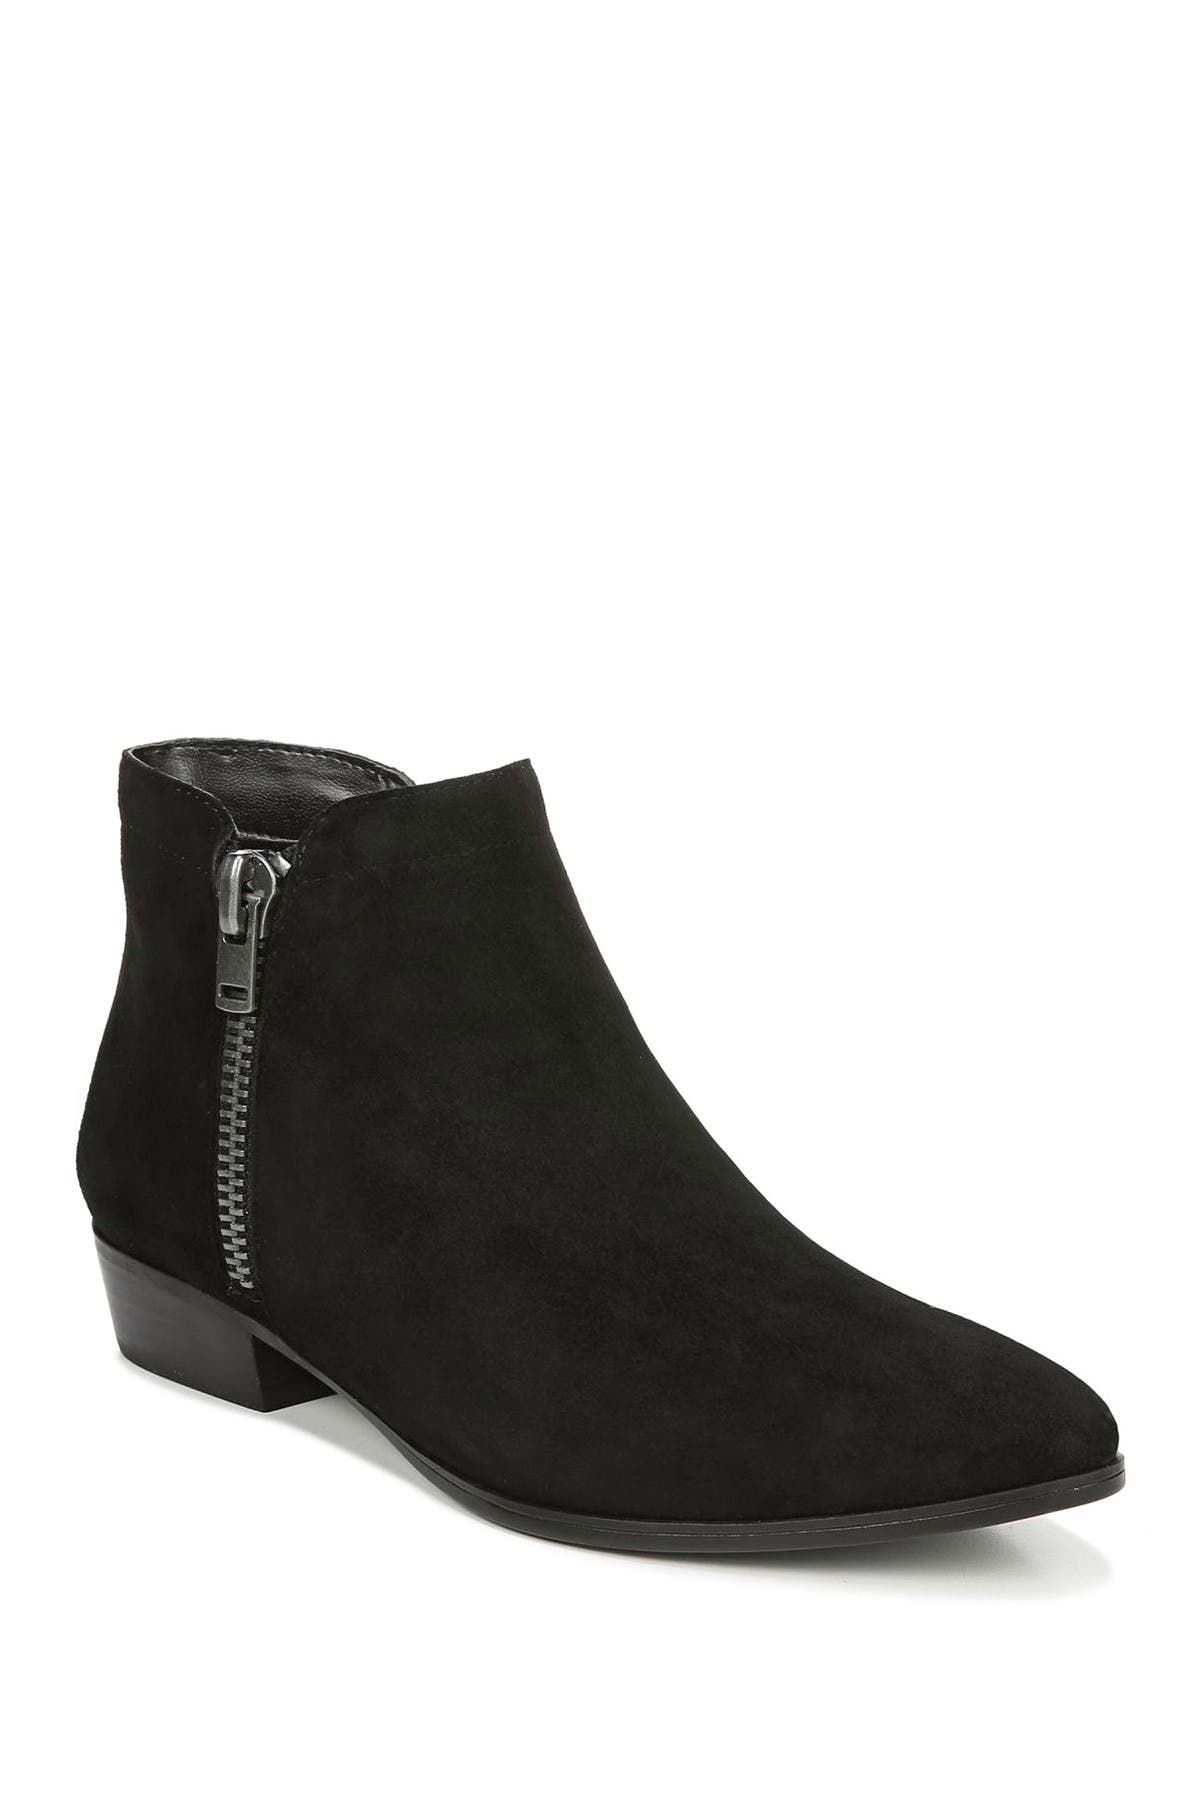 Naturalizer | Claire Ankle Boot - Wide 